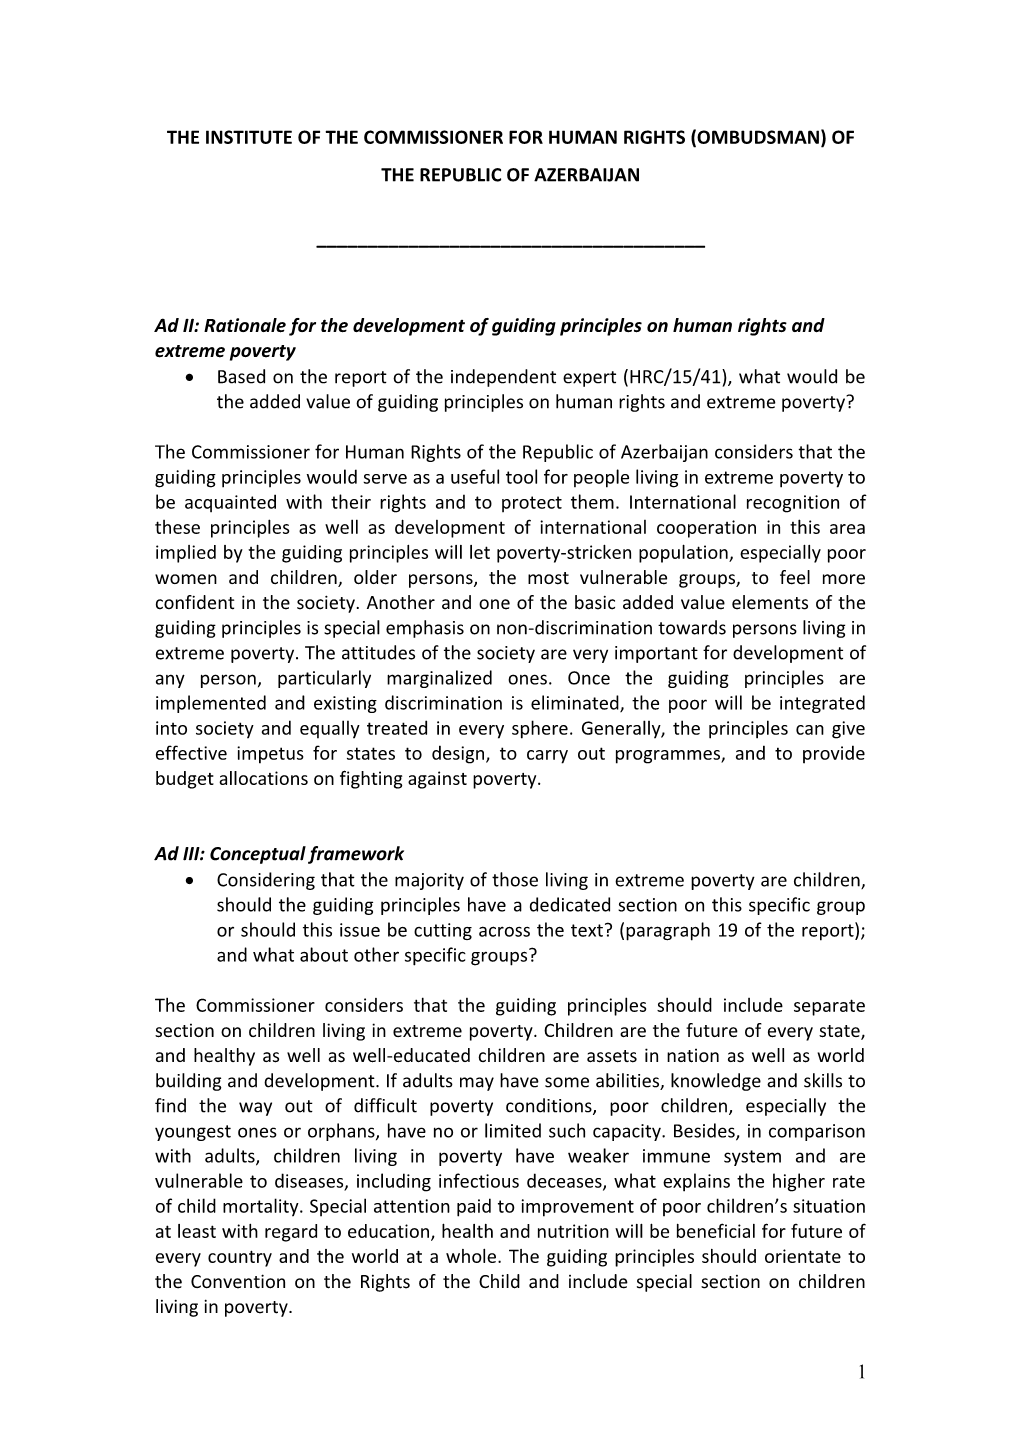 Ad II: Rationale for the Development of Guiding Principles on Human Rights and Extreme Poverty